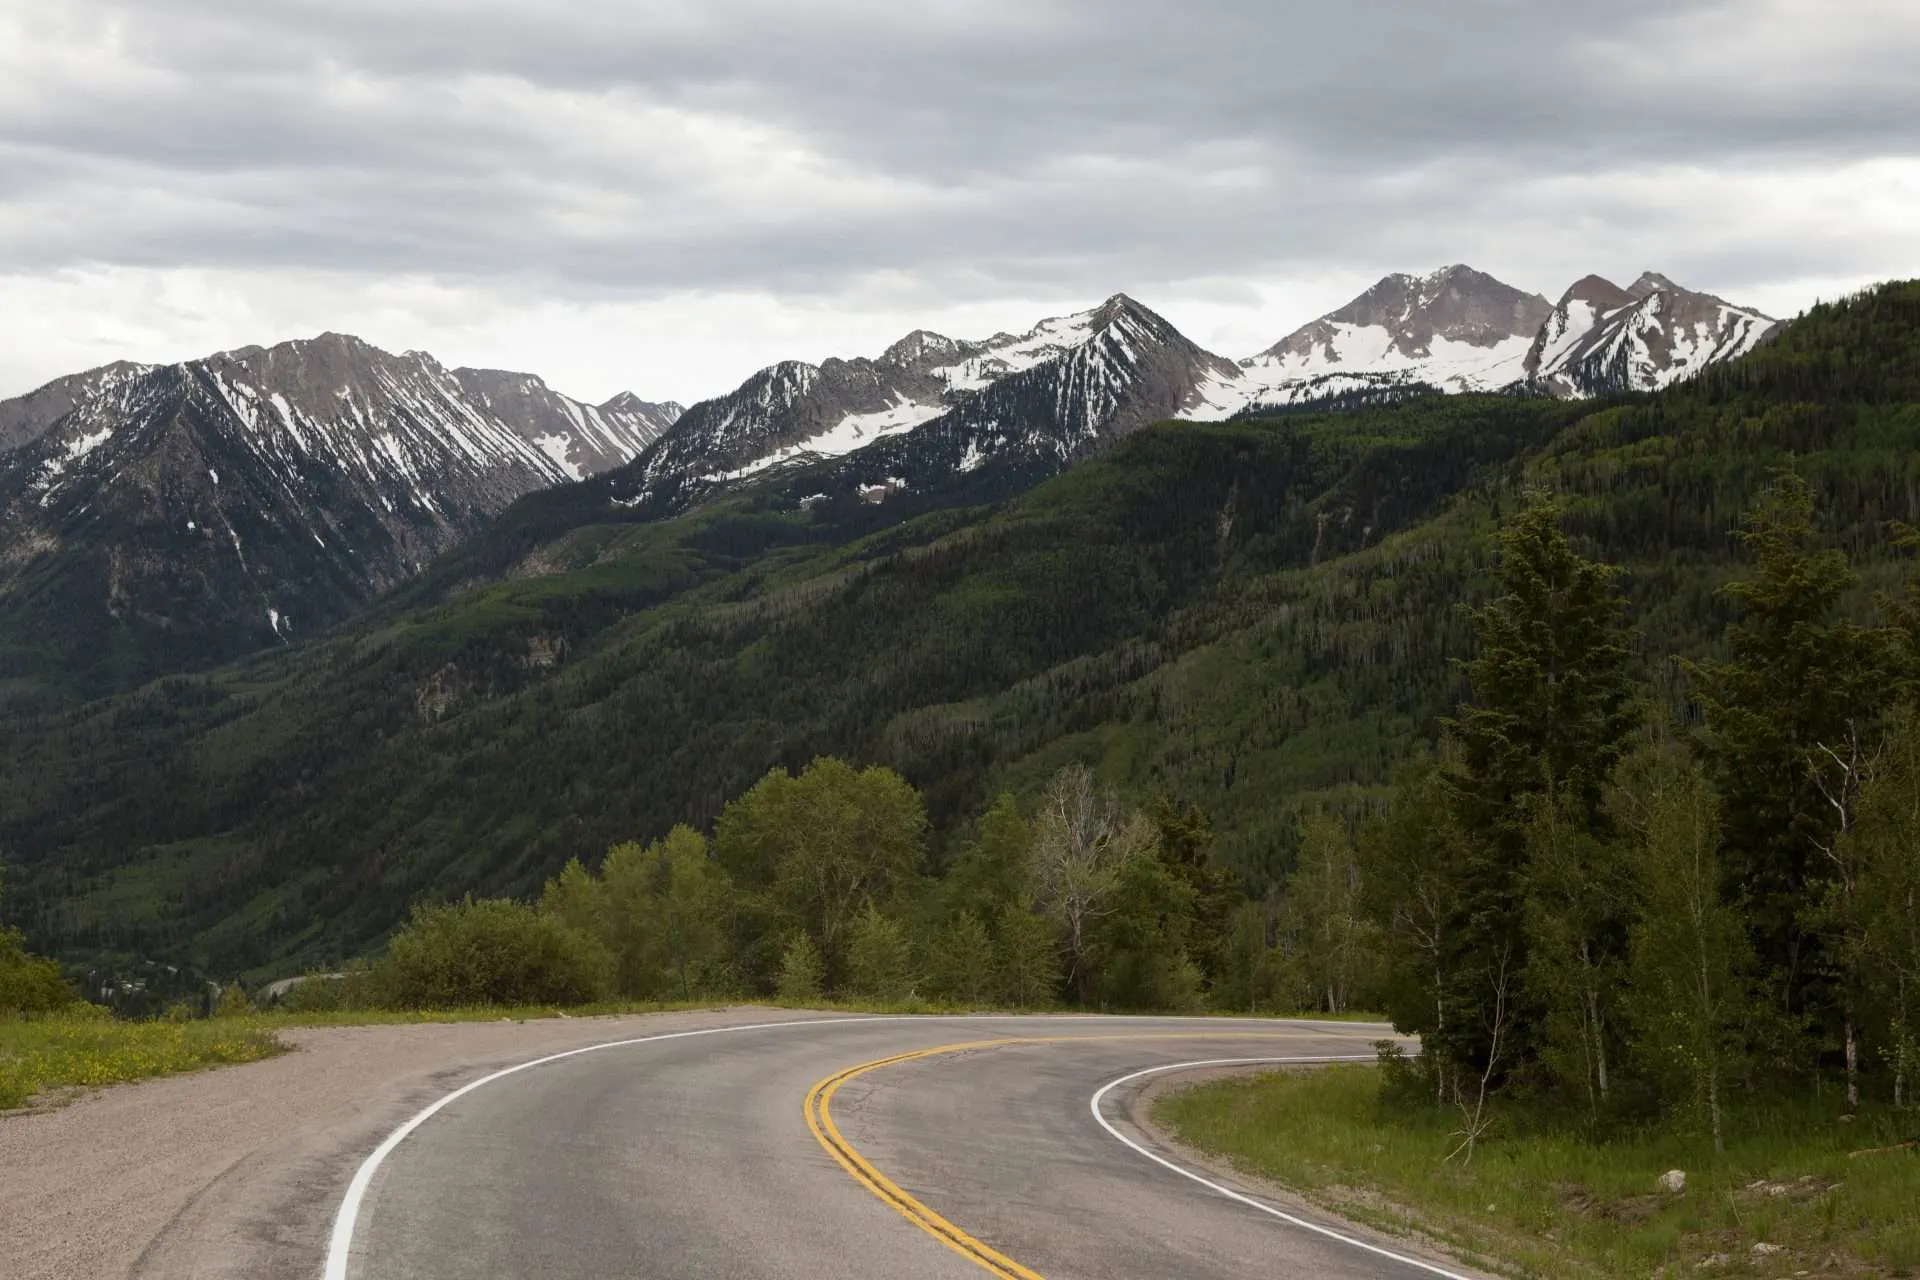 View of highway and mountainous landscape, Colorado, USA